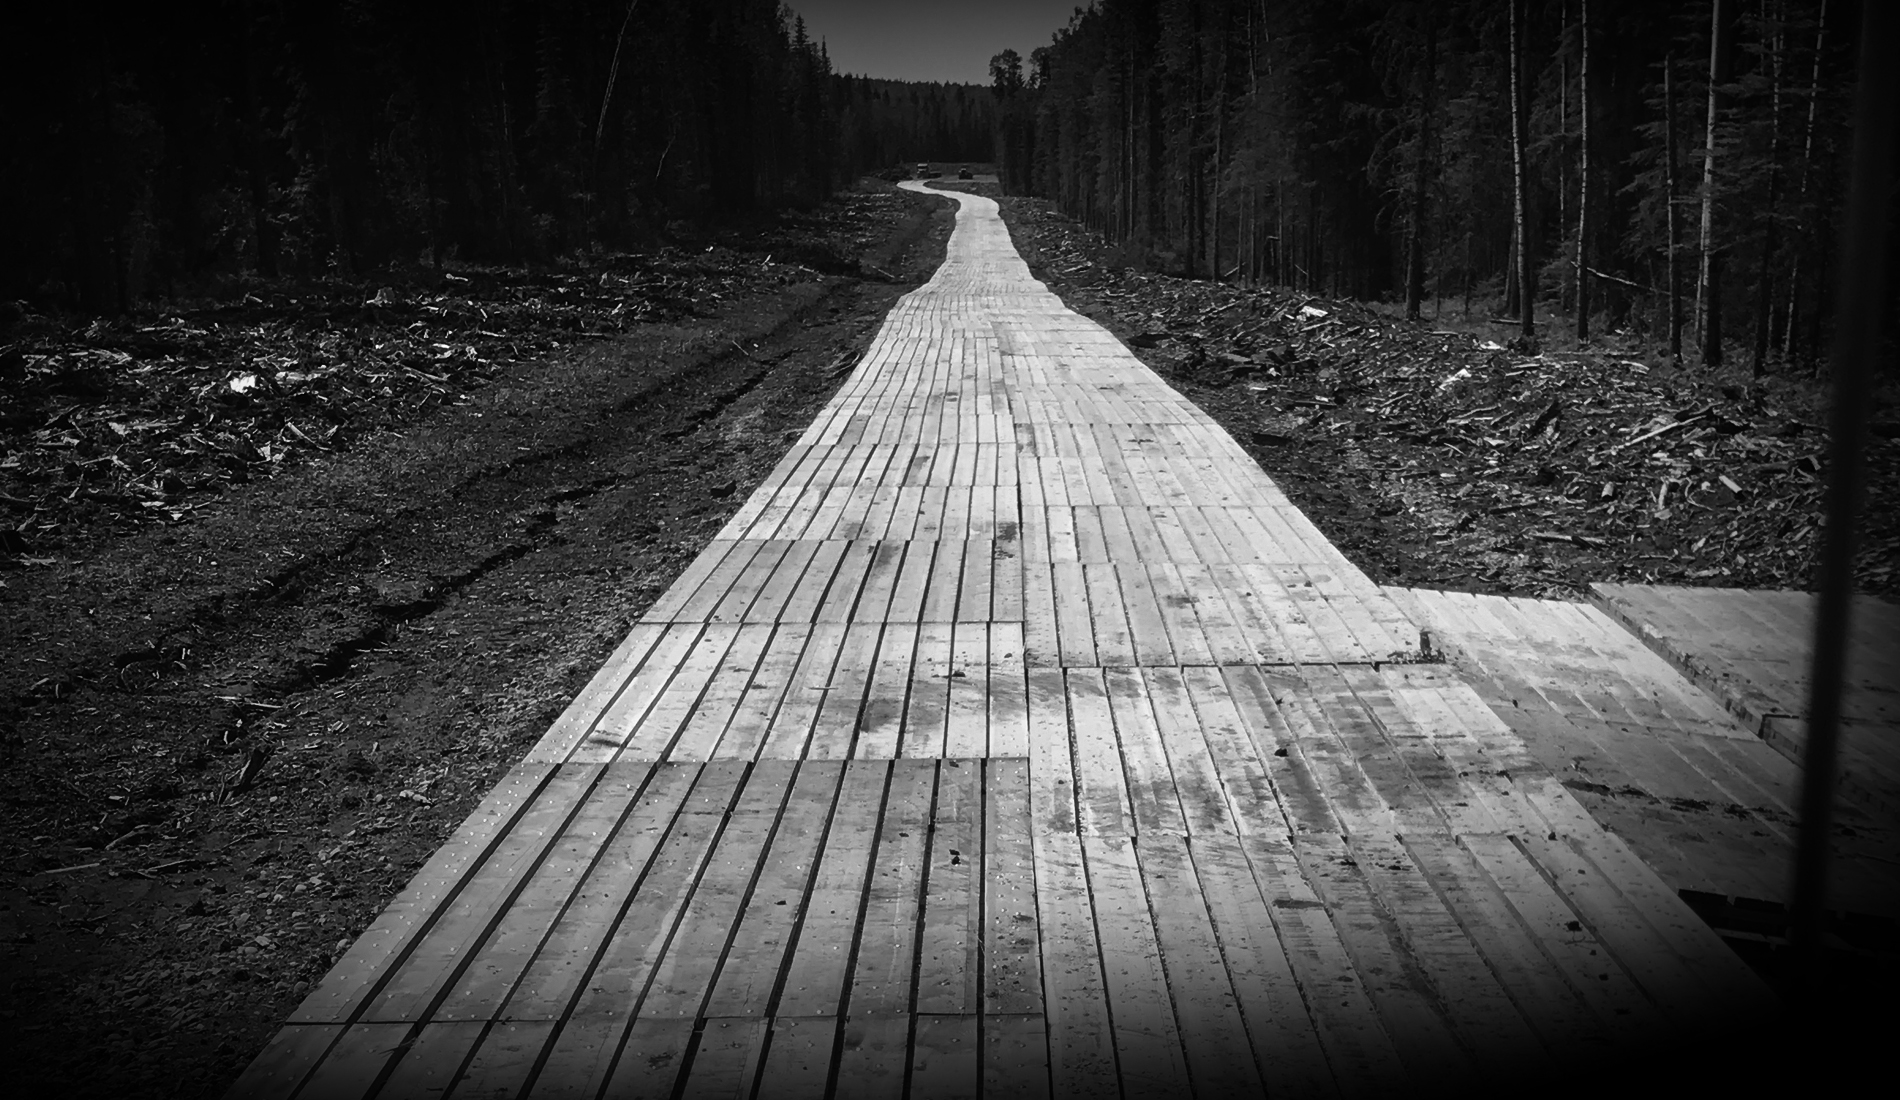 long road lined with access mats in between trees in Alberta, Canada